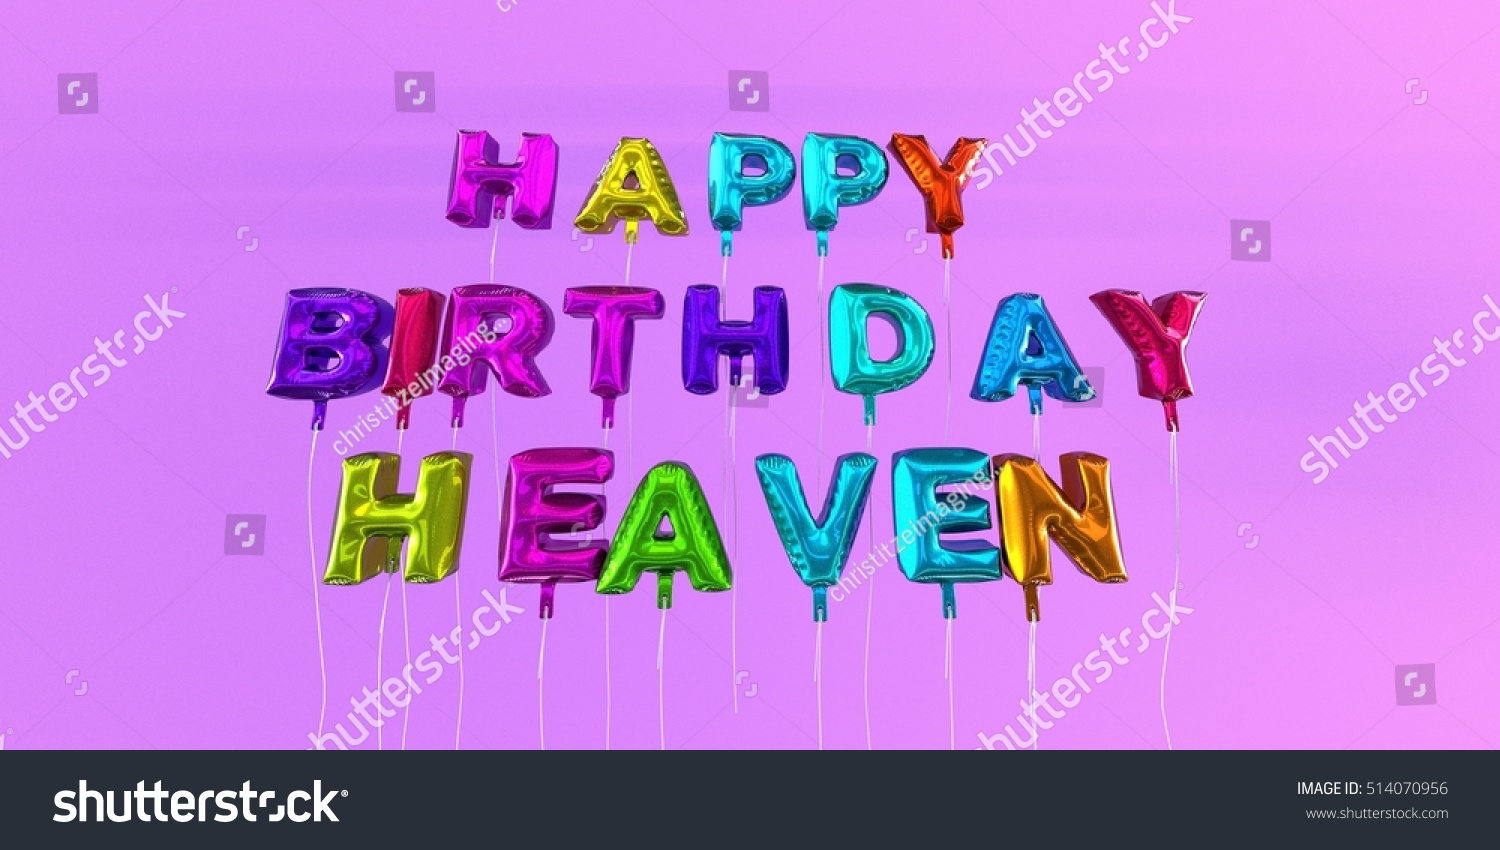 Find Happy Birthday Heaven Card Balloon Text stock images in HD and million...